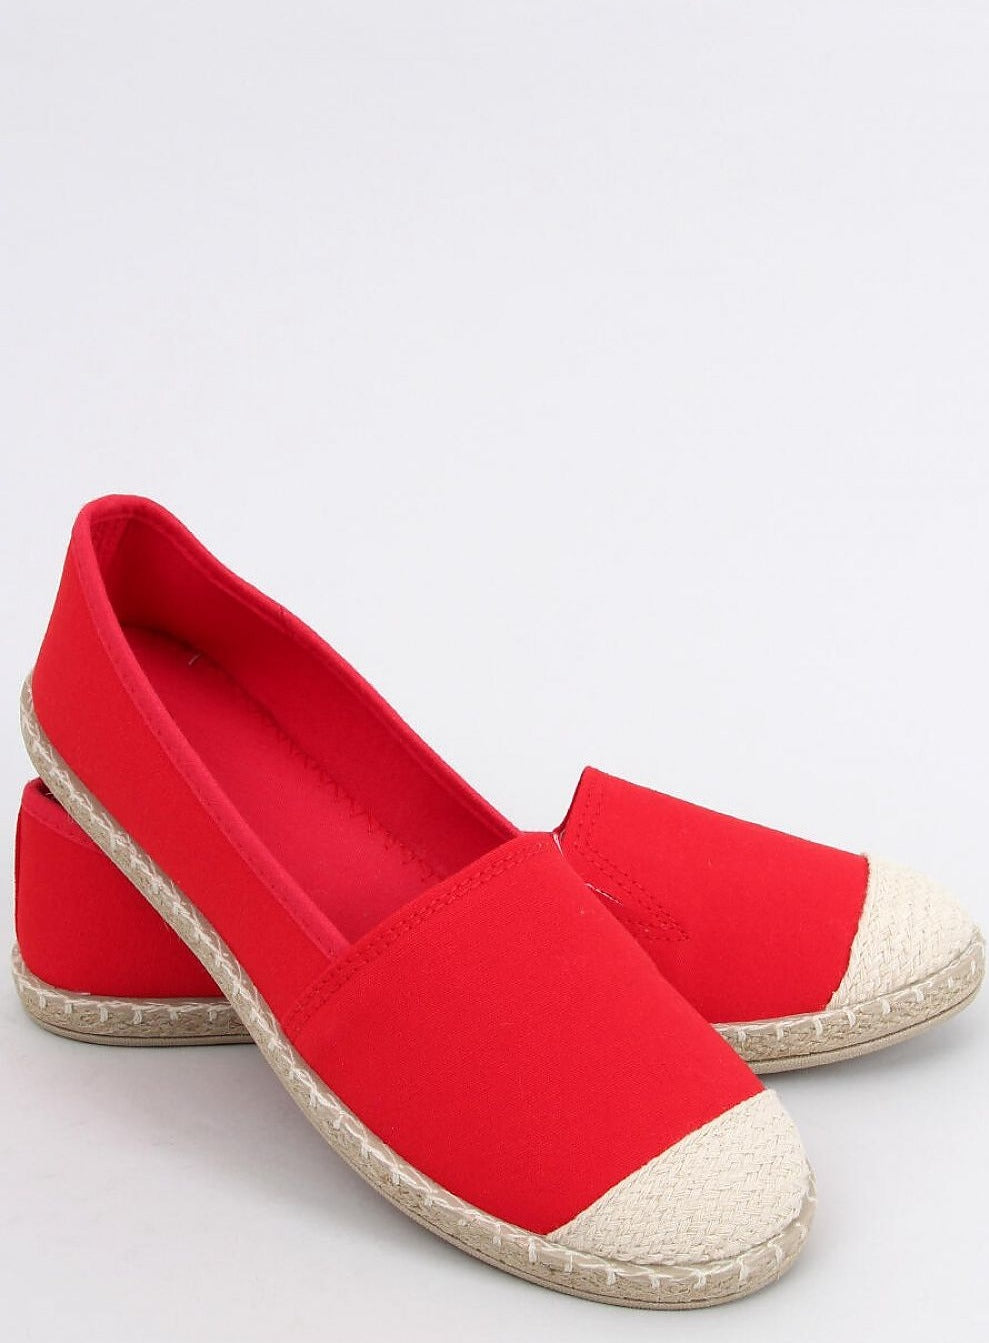 TEEK - Red Flat Espadrille Loafer Shoes SHOES TEEK MH 5.5  